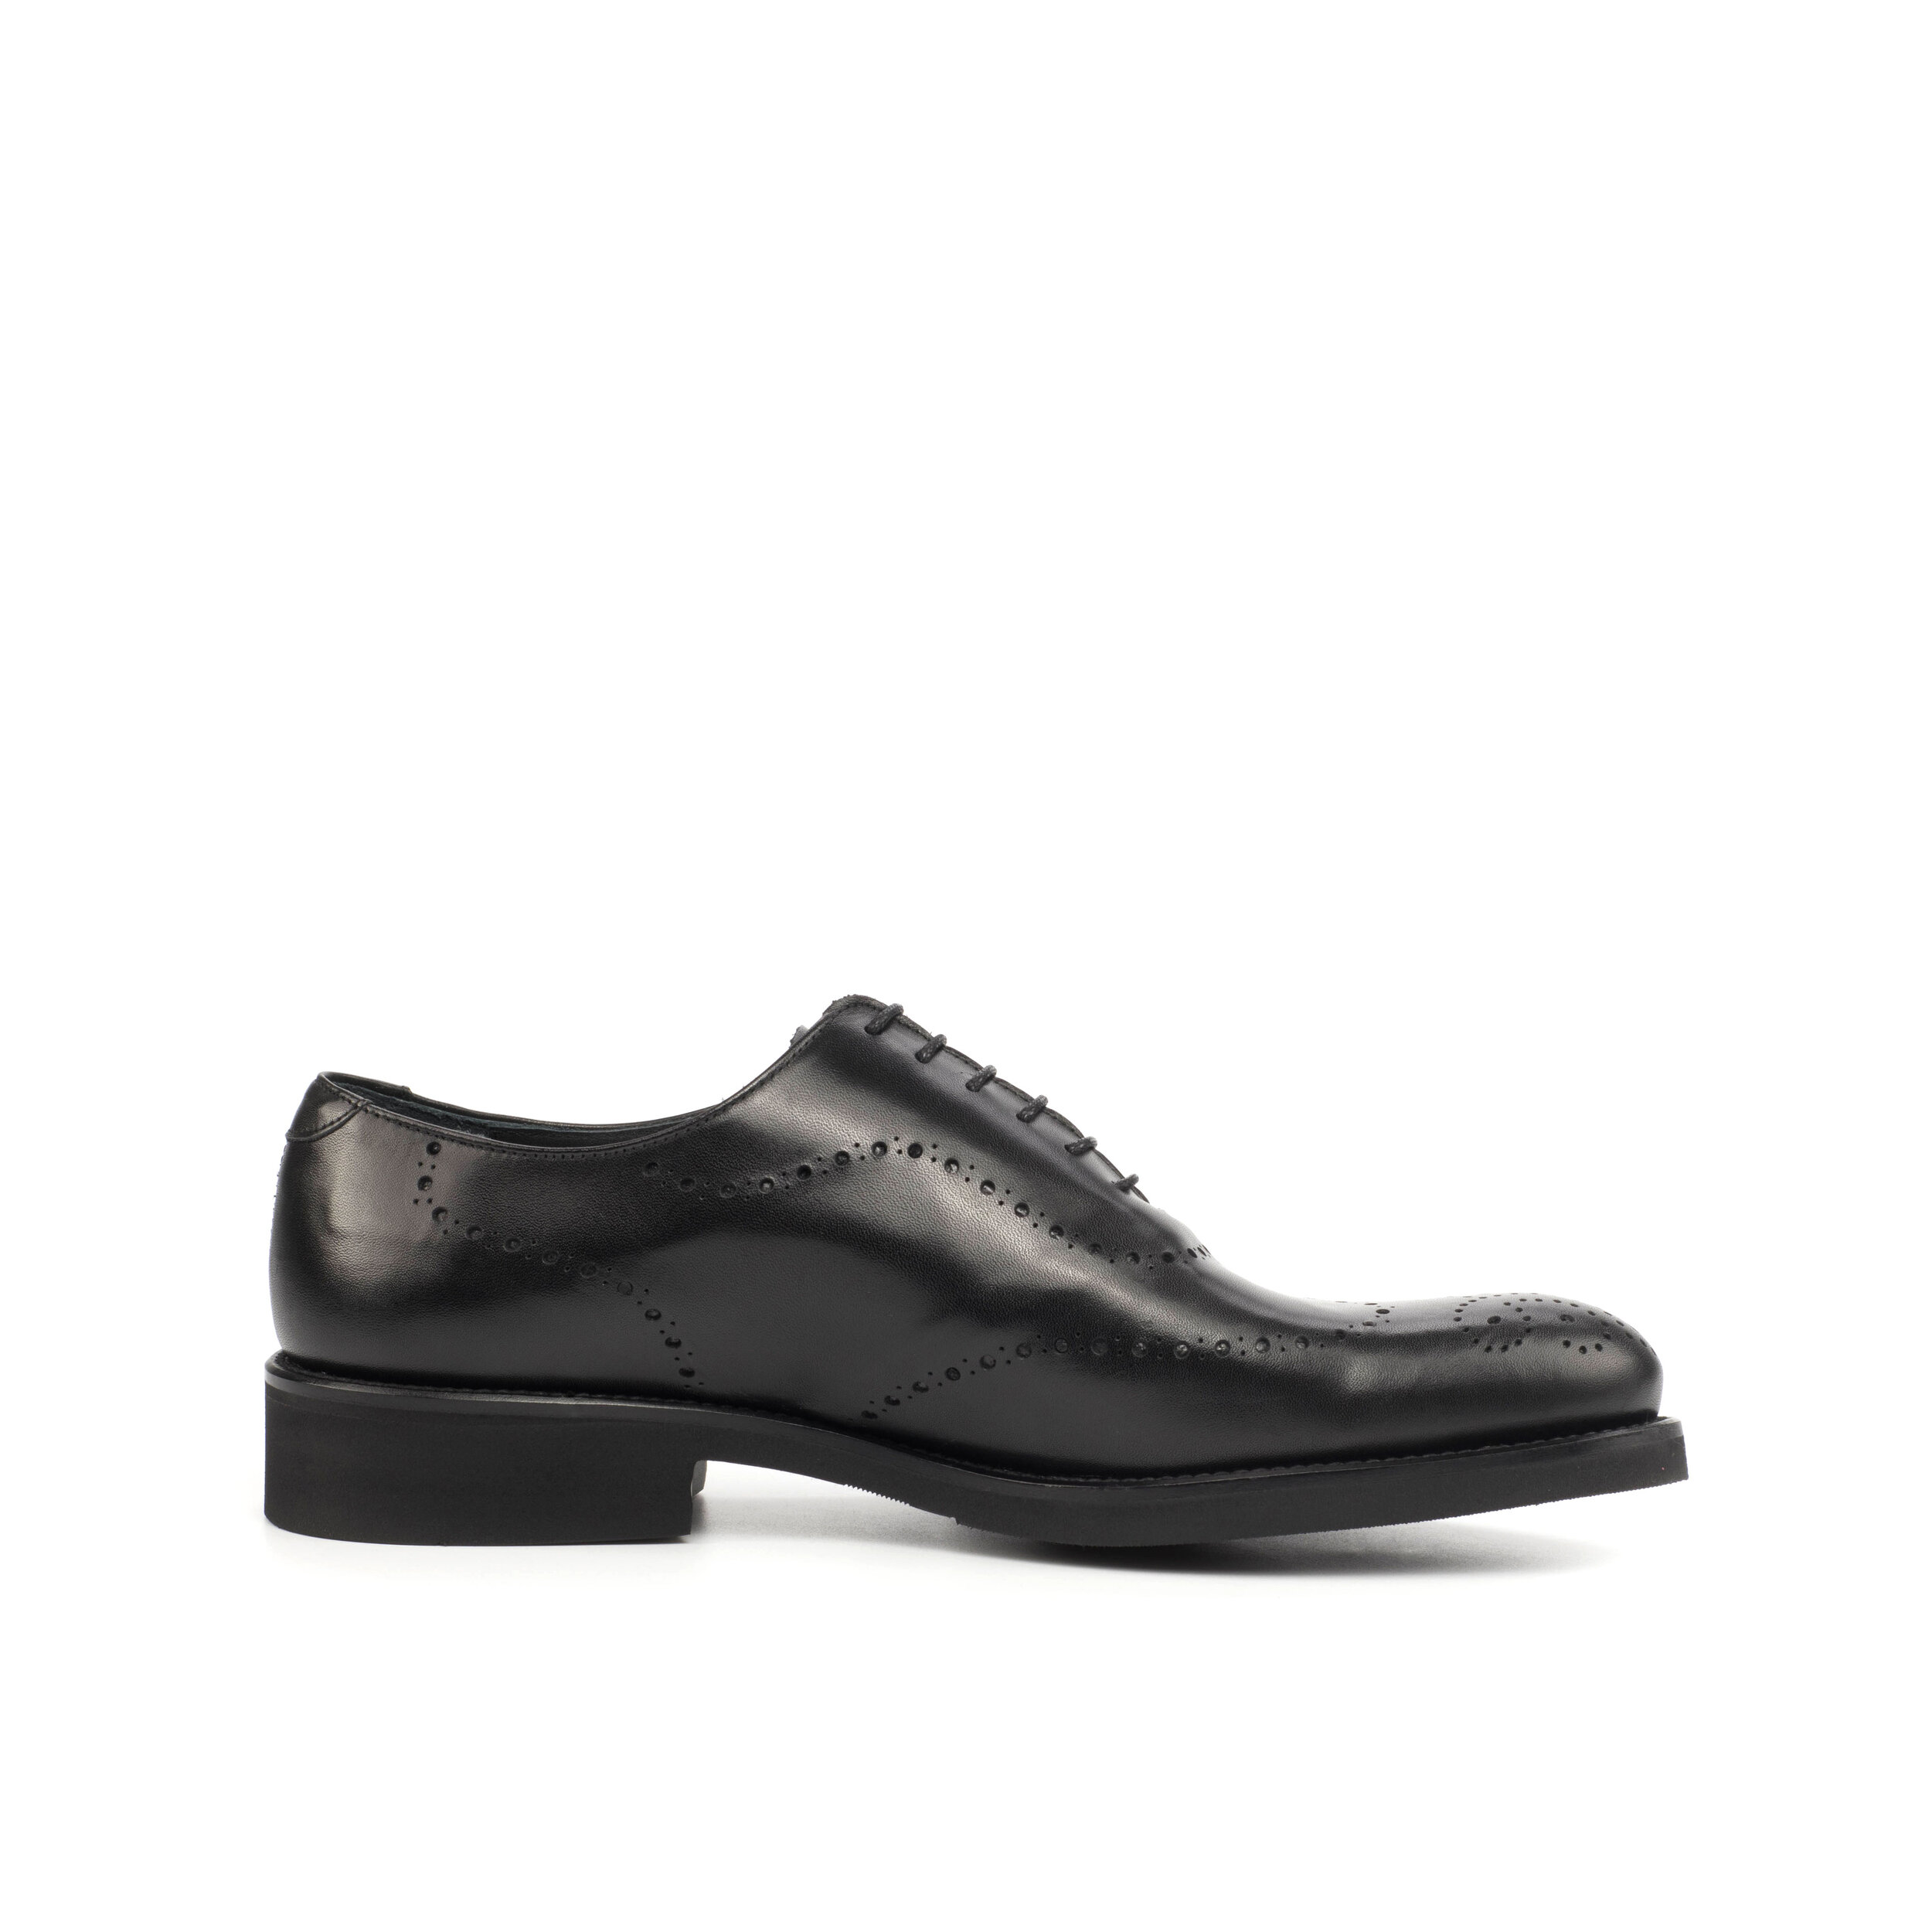 Alexander Noel | Leather Shoes For Men - Loafers, Oxford Shoes, Chukka ...